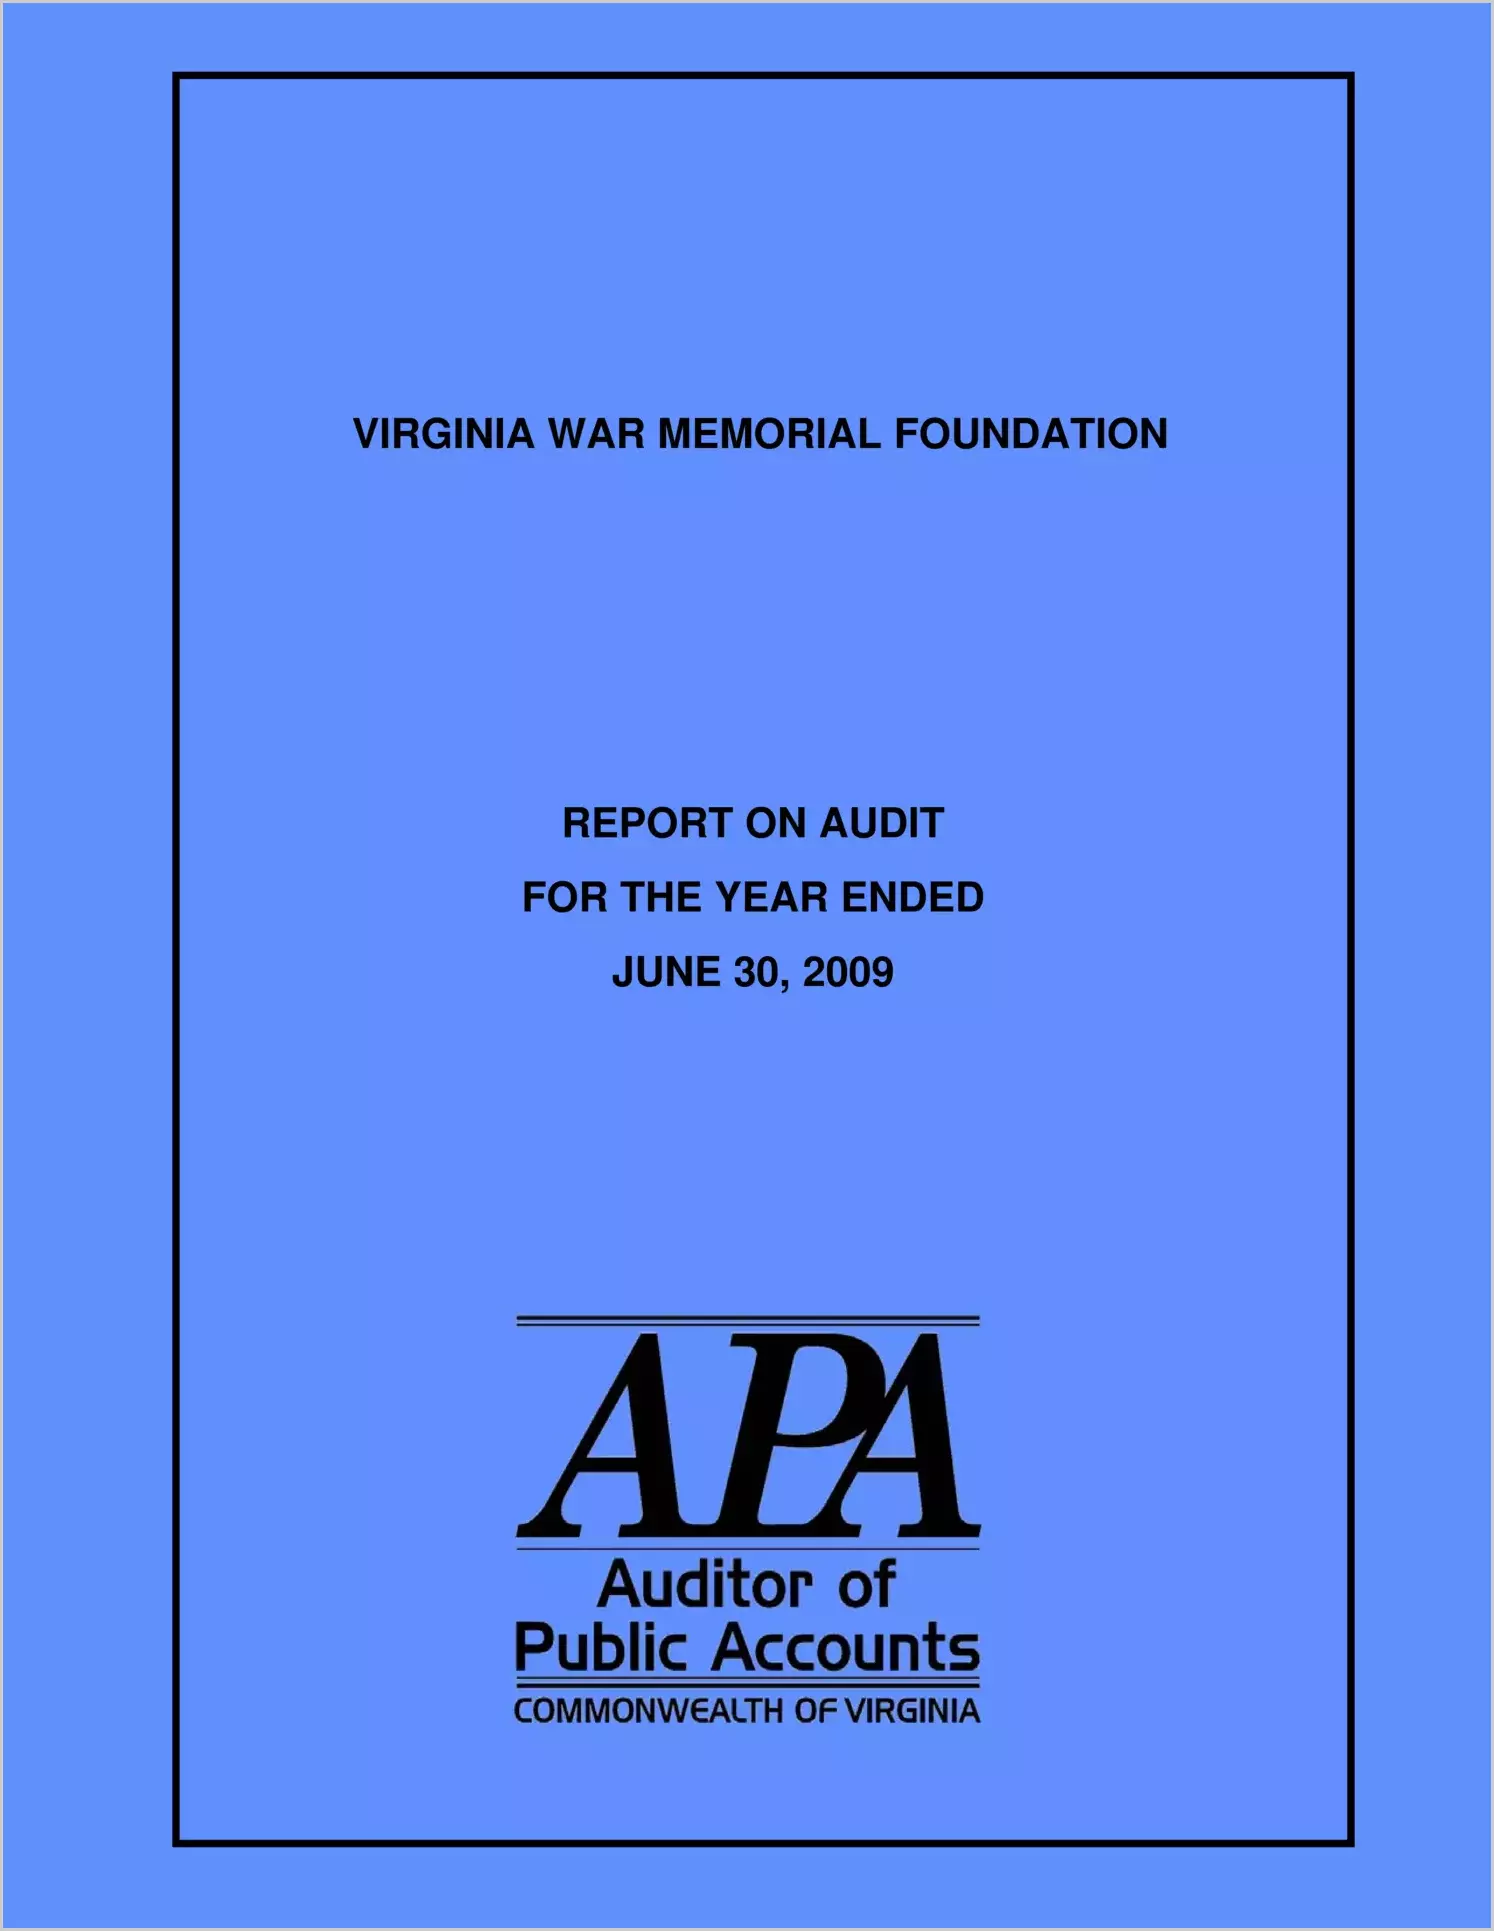 Virginia War Memorial Foundation report on audit for the year ended June 30, 2009